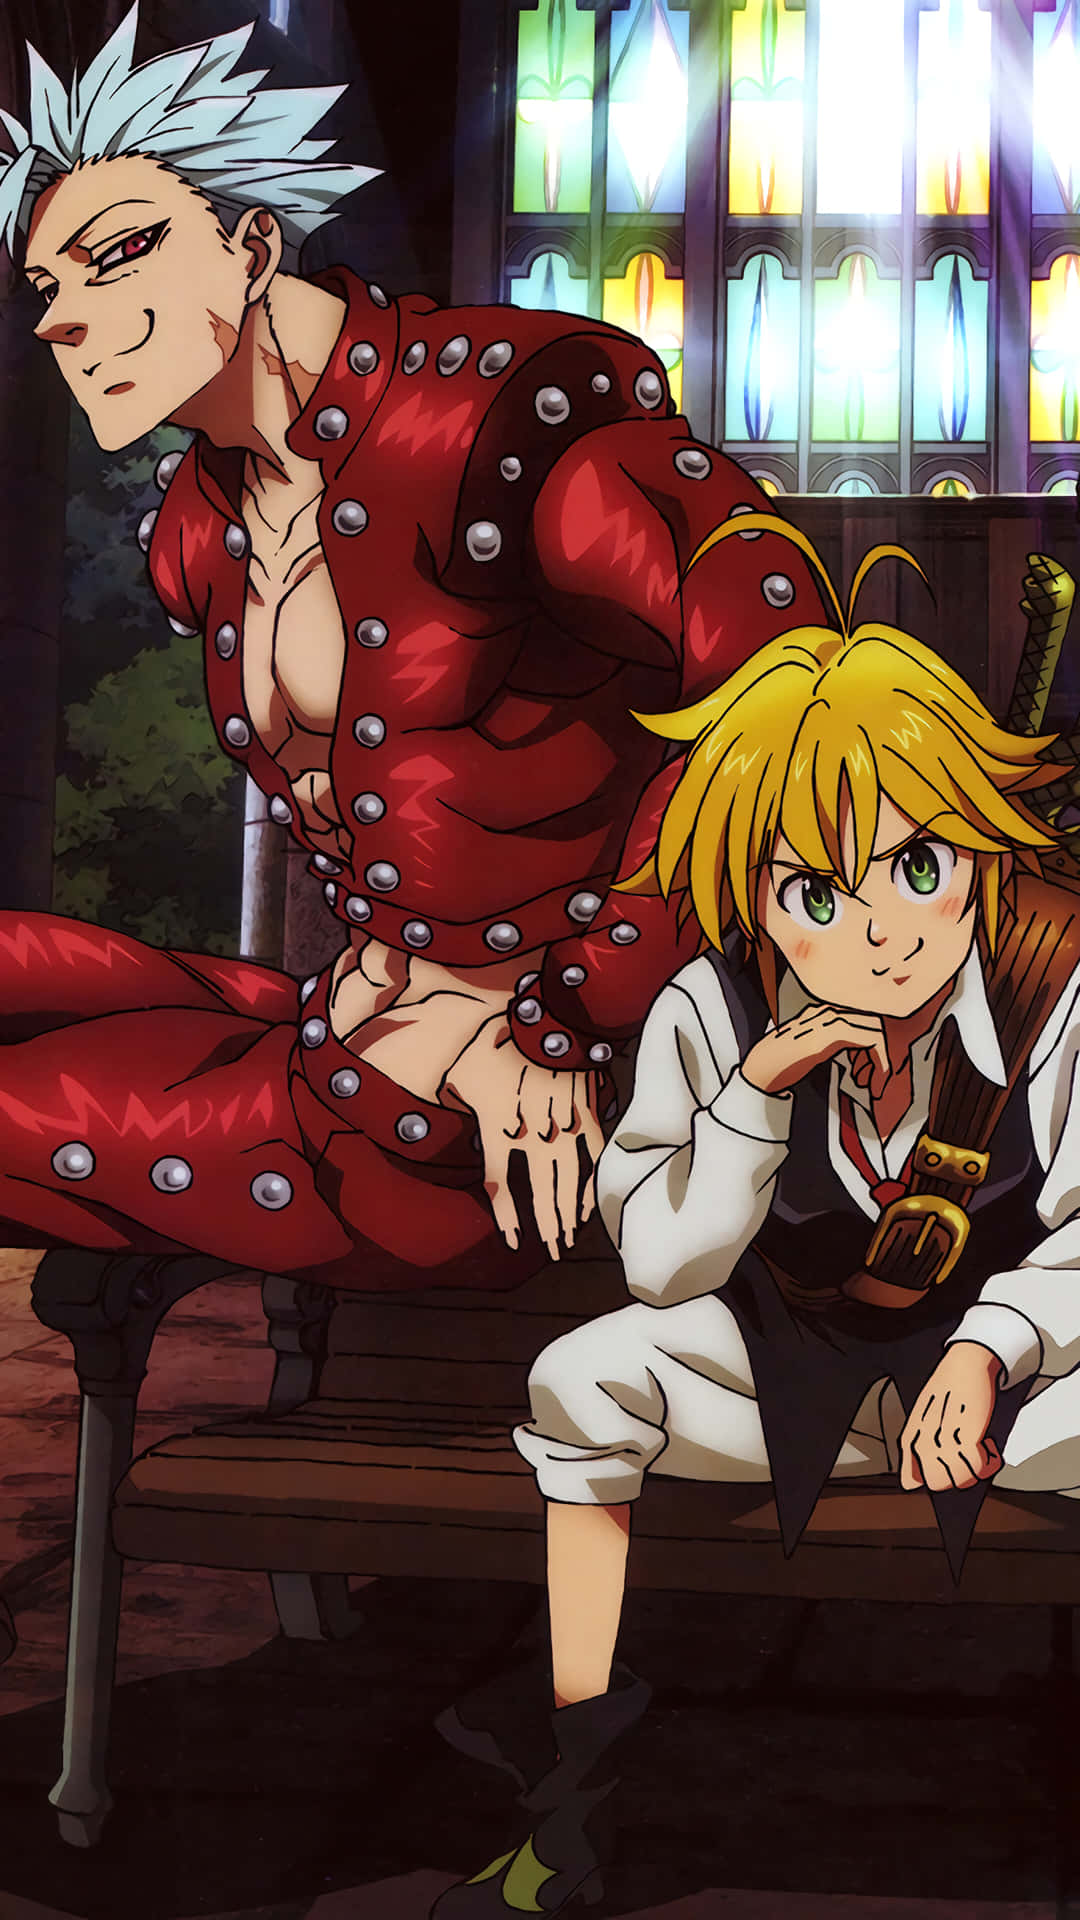 Embrace the Seven Deadly Sins with this Iphone Wallpaper